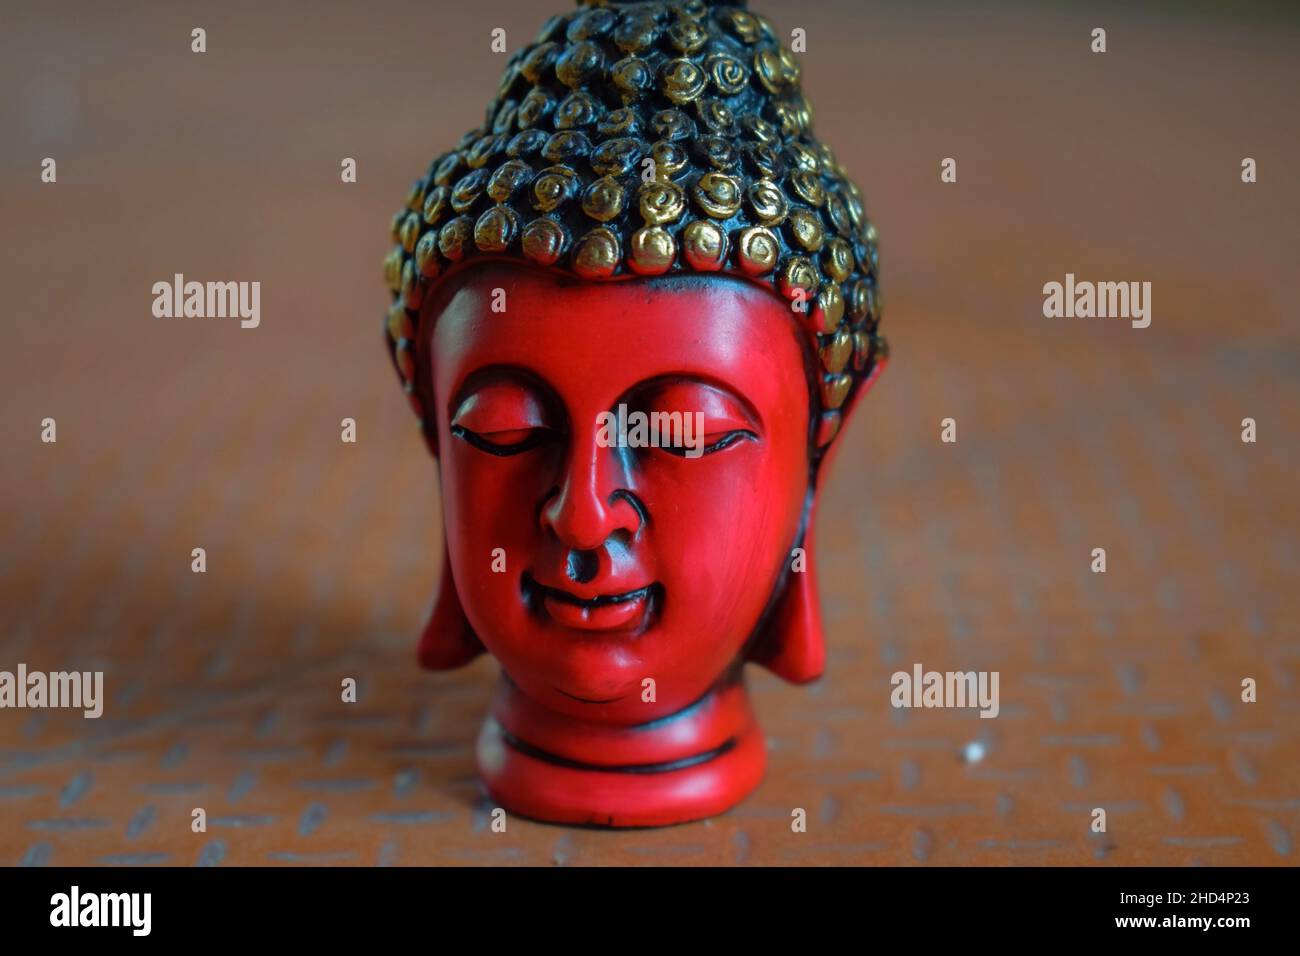 Stock photo of beautiful red color face sculpture or statue of lord buddha, head of statue painted with black and golden color on brown color backgrou Stock Photo